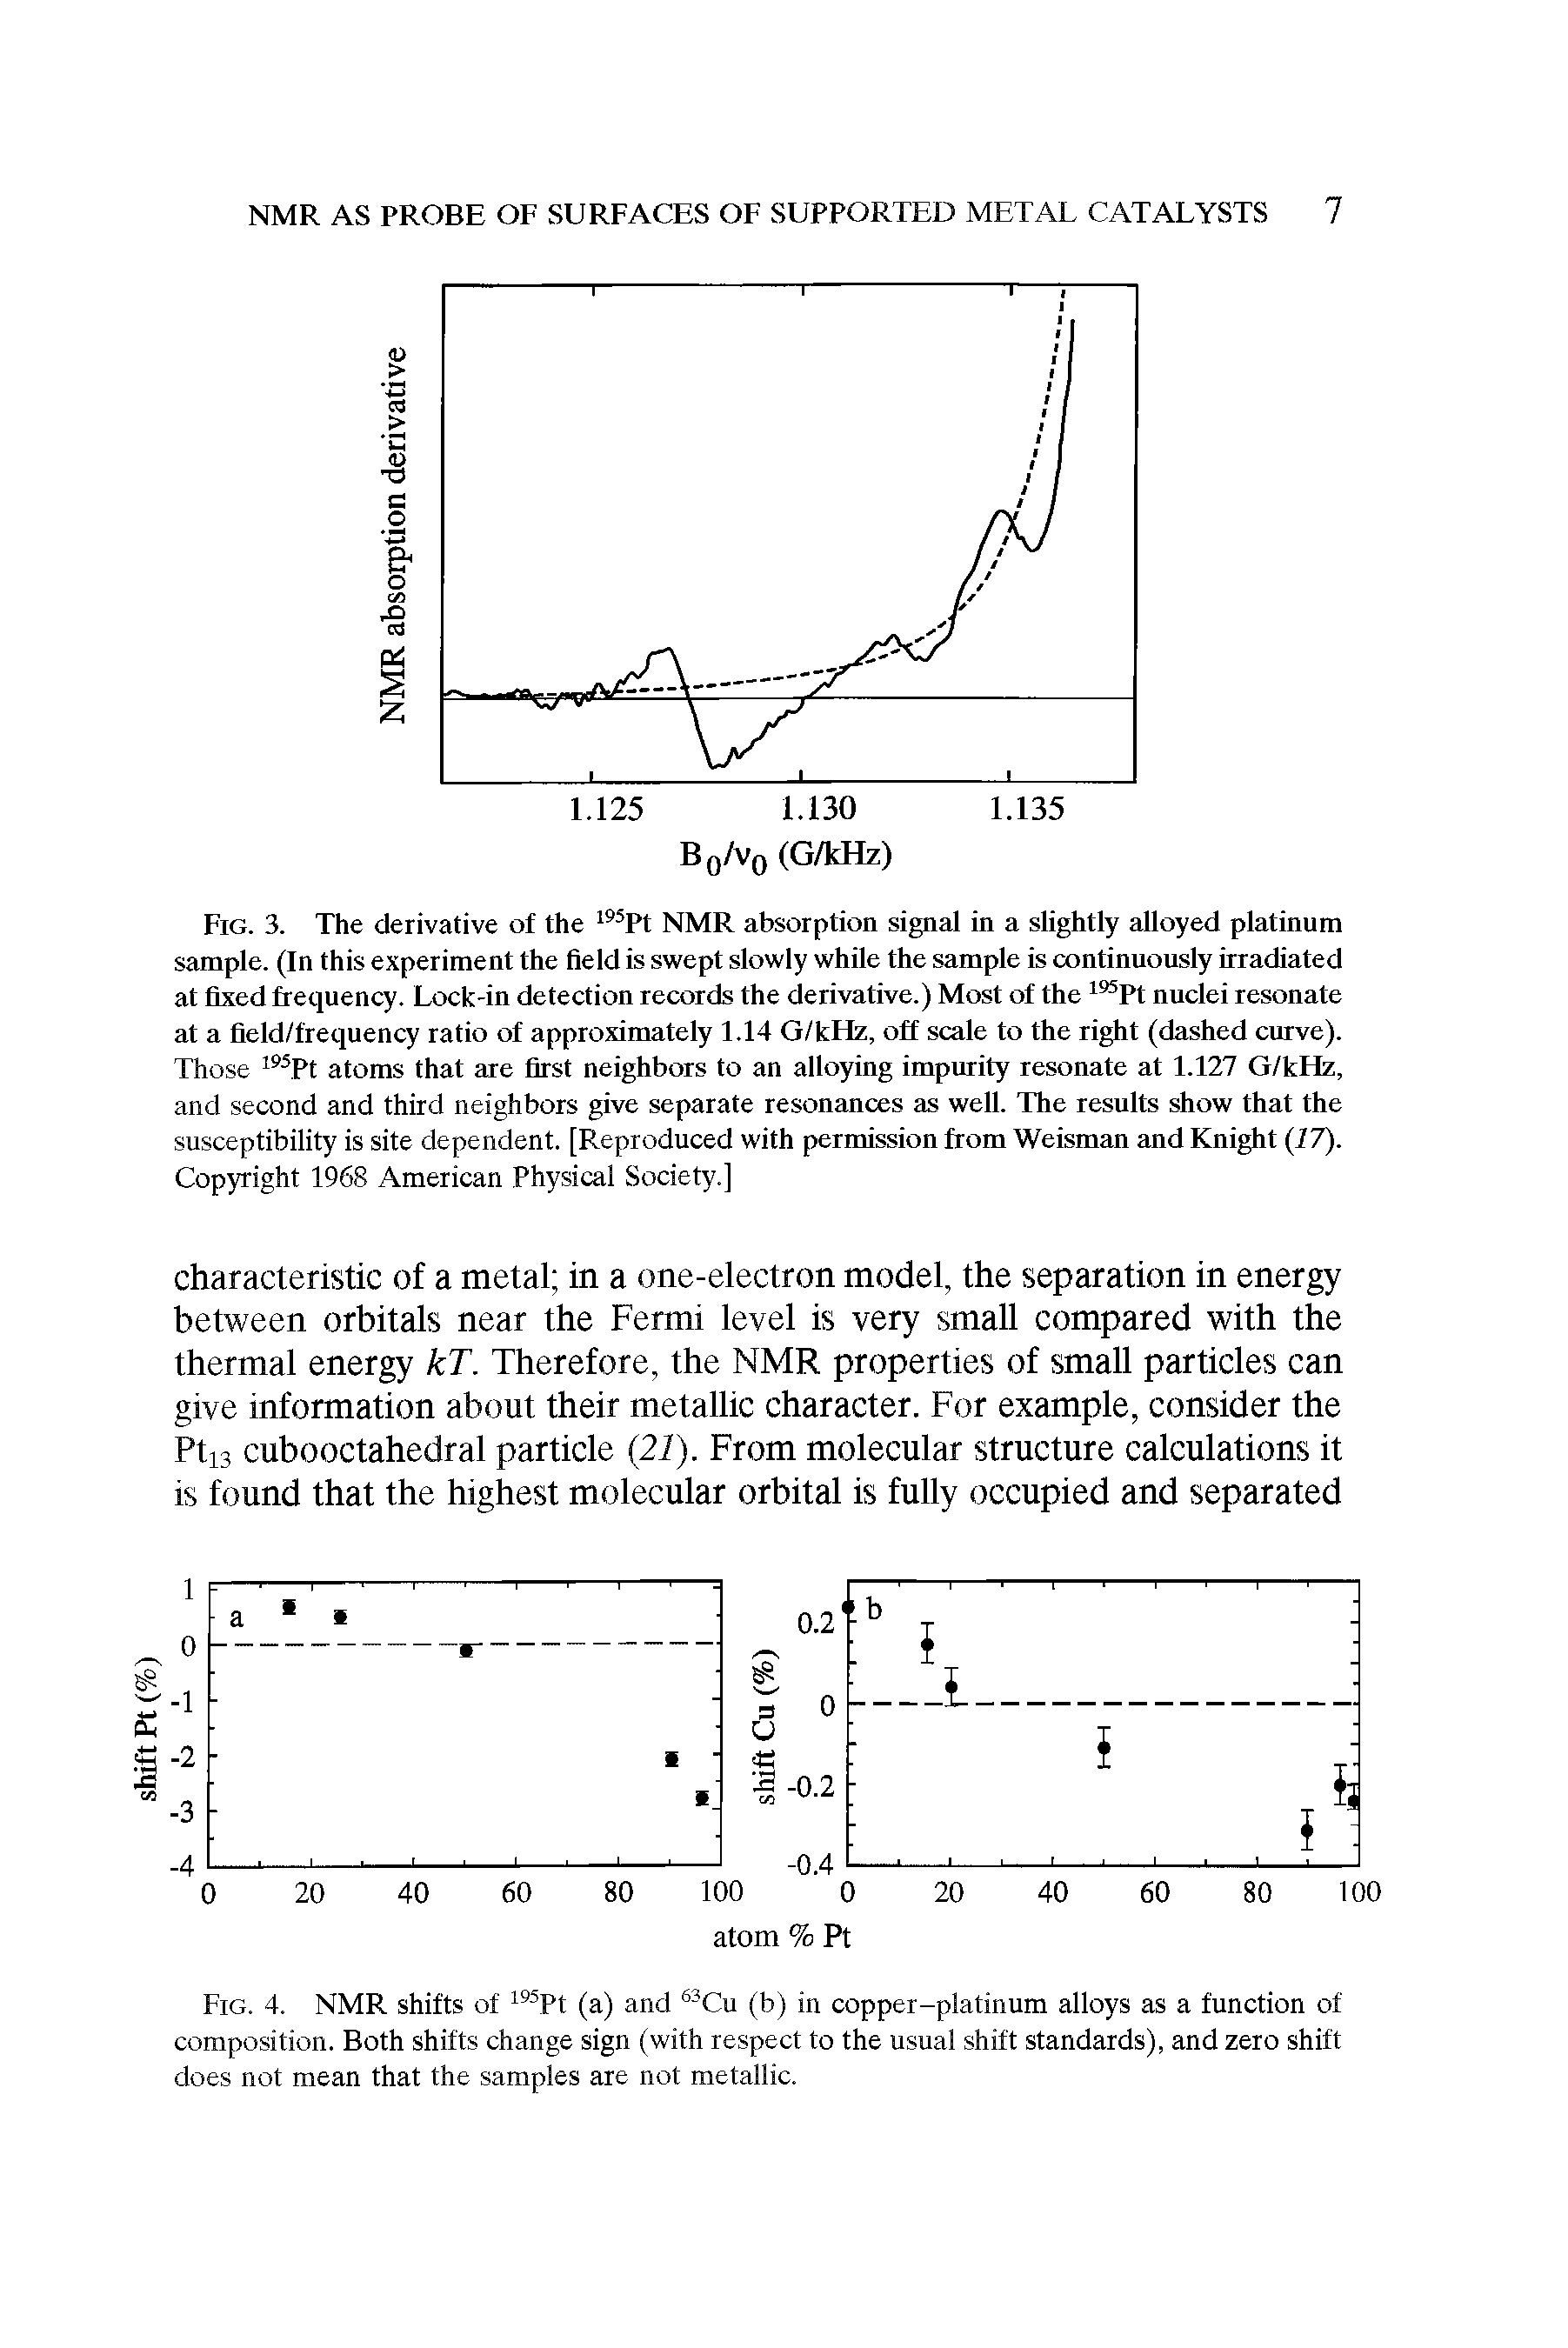 Fig. 4. NMR shifts of Pt (a) and -Cu (b) in copper-platinum alloys as a function of composition. Both shifts change sign (with respect to the usual shift standards), and zero shift does not mean that the samples are not metallic.